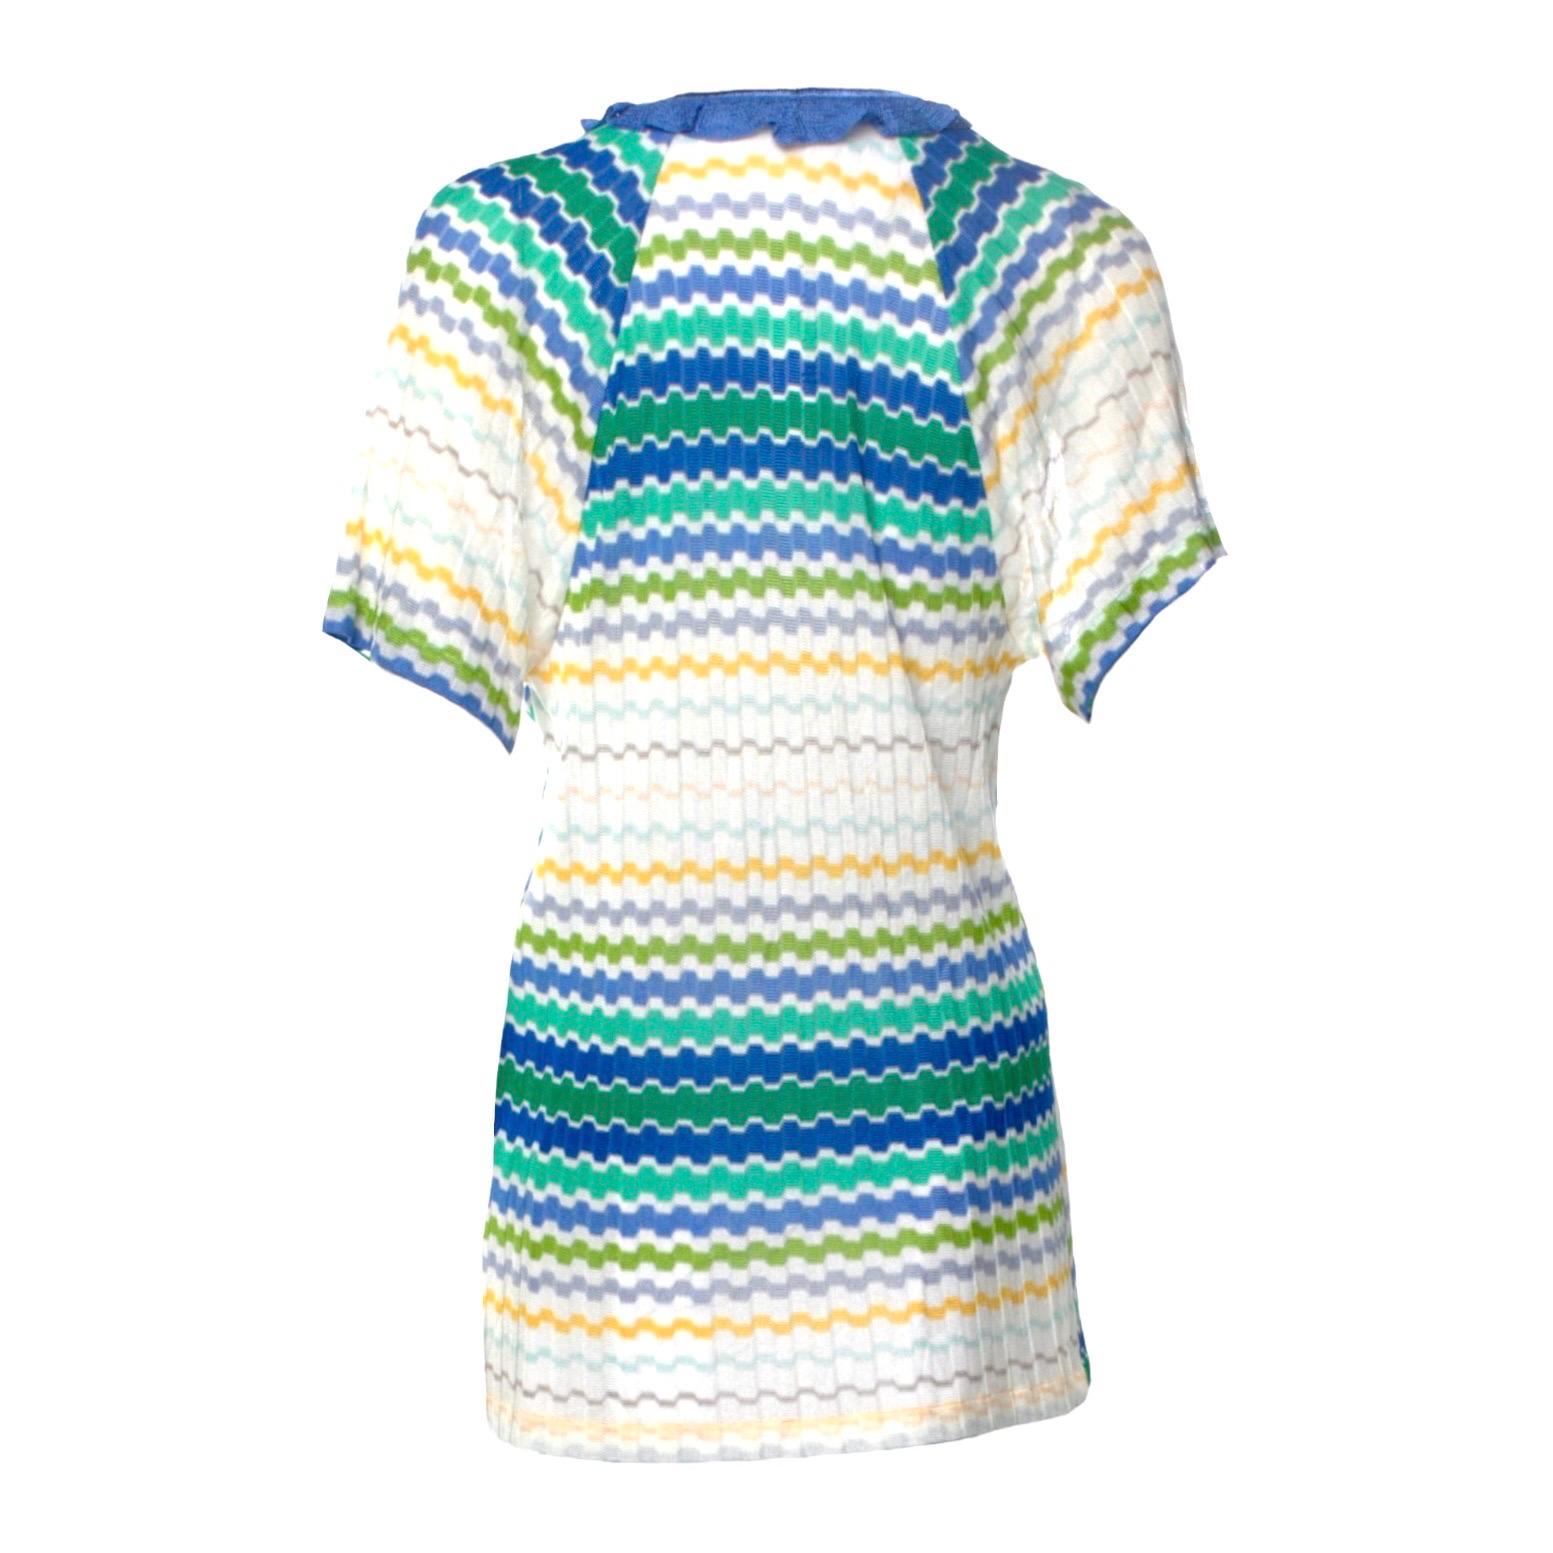 This colorful Missoni signature crochet-knit tunic is designed for a sexy summer day. It the perfect mini piece for sun-soaked days on the beach. Throw it over your bikini for a stylish lunch or team it heels for a cool dinner look.


Beautiful